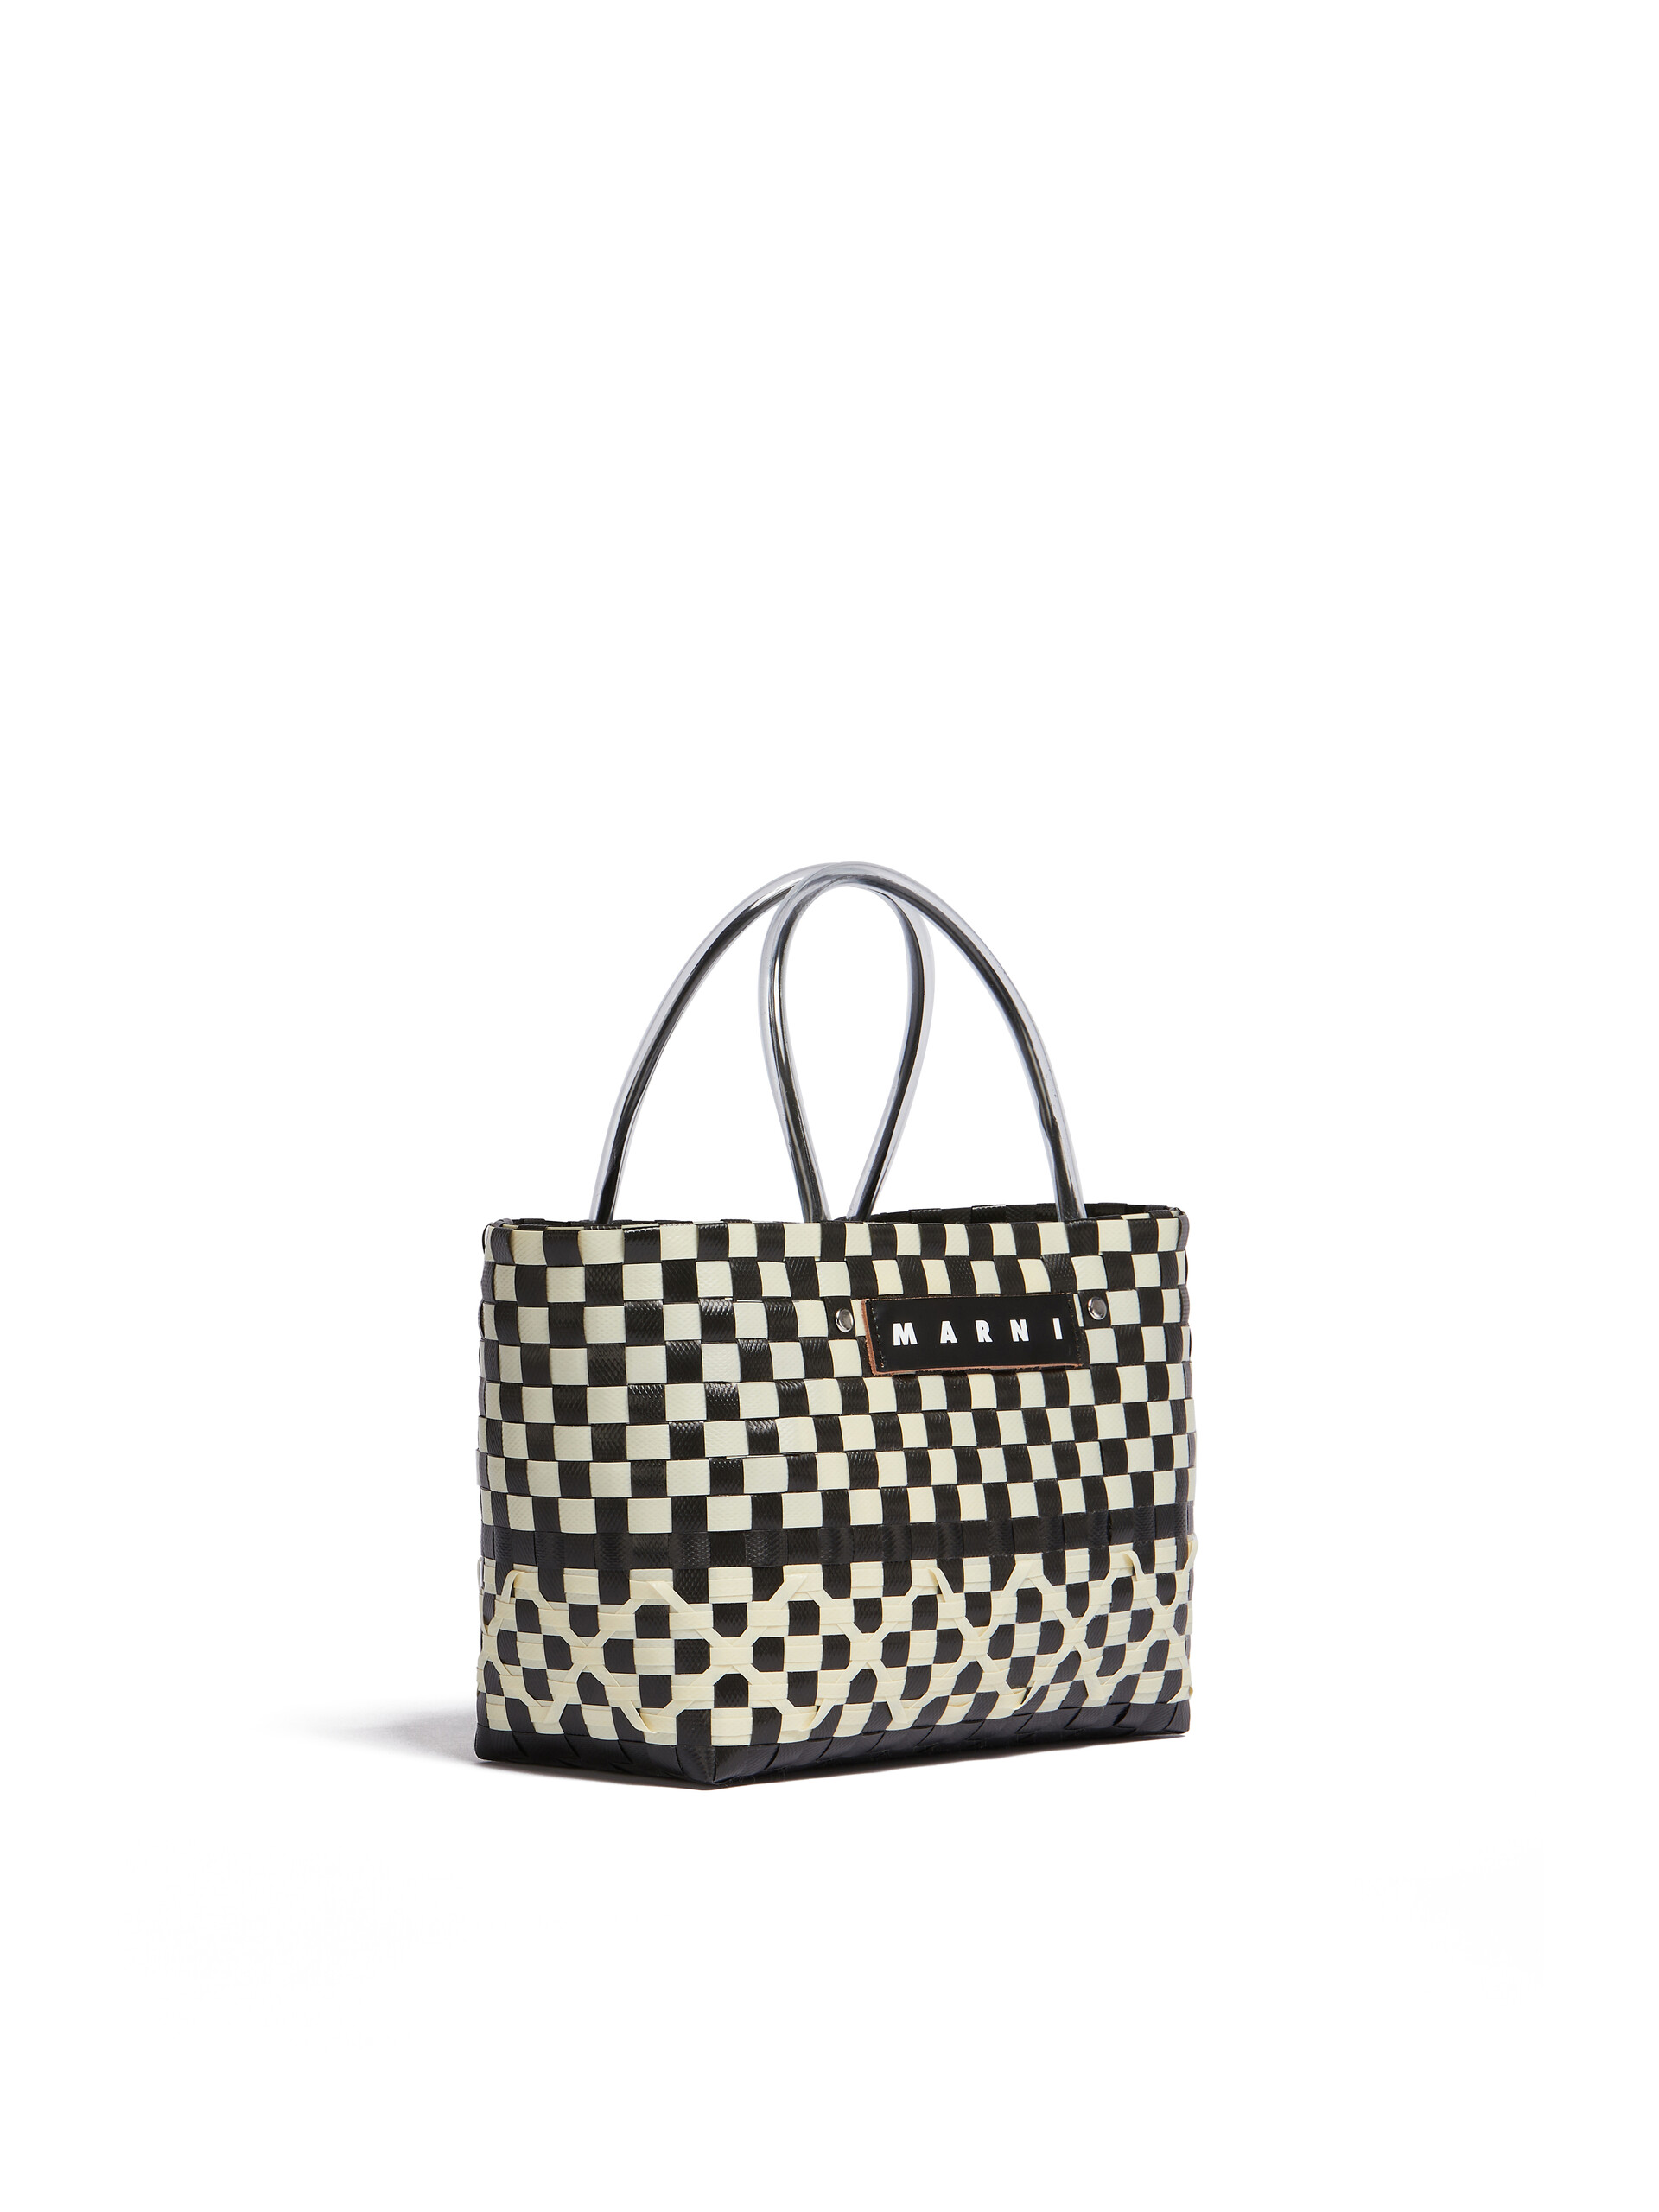 Frank A & Frank Y - Friday - we're in love ❤️ Marni trunkbag S H O P >>>  Frank A & Frank Y O N L I N E >>>